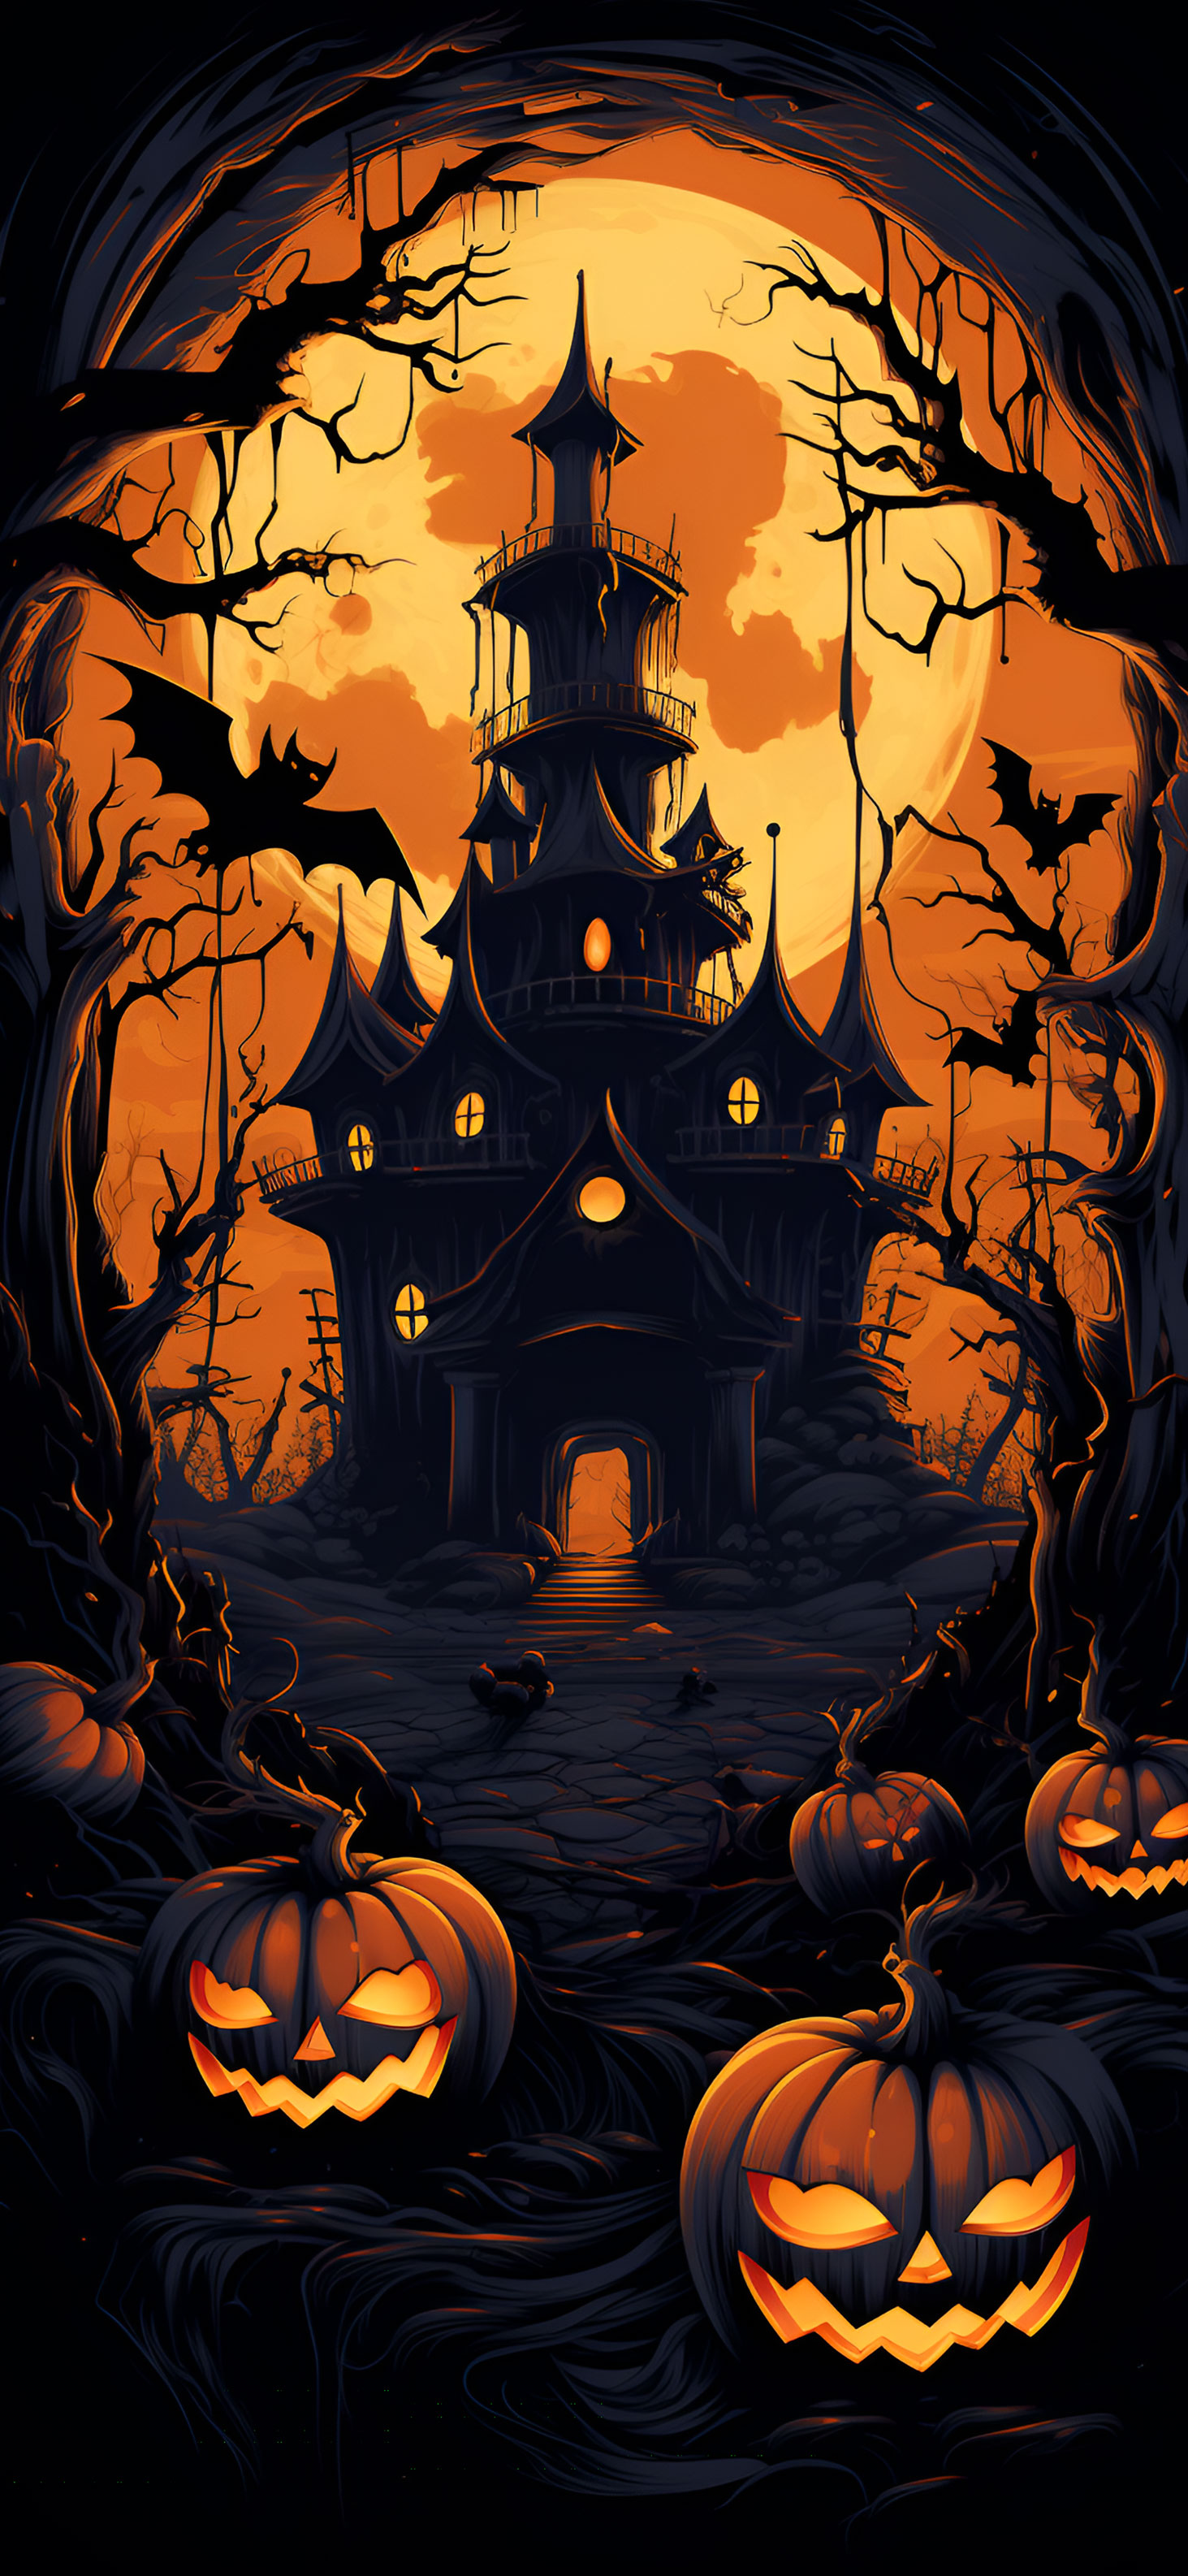 Halloween Spooky House & Jack-o'-lantern Wallpapers for iPhone